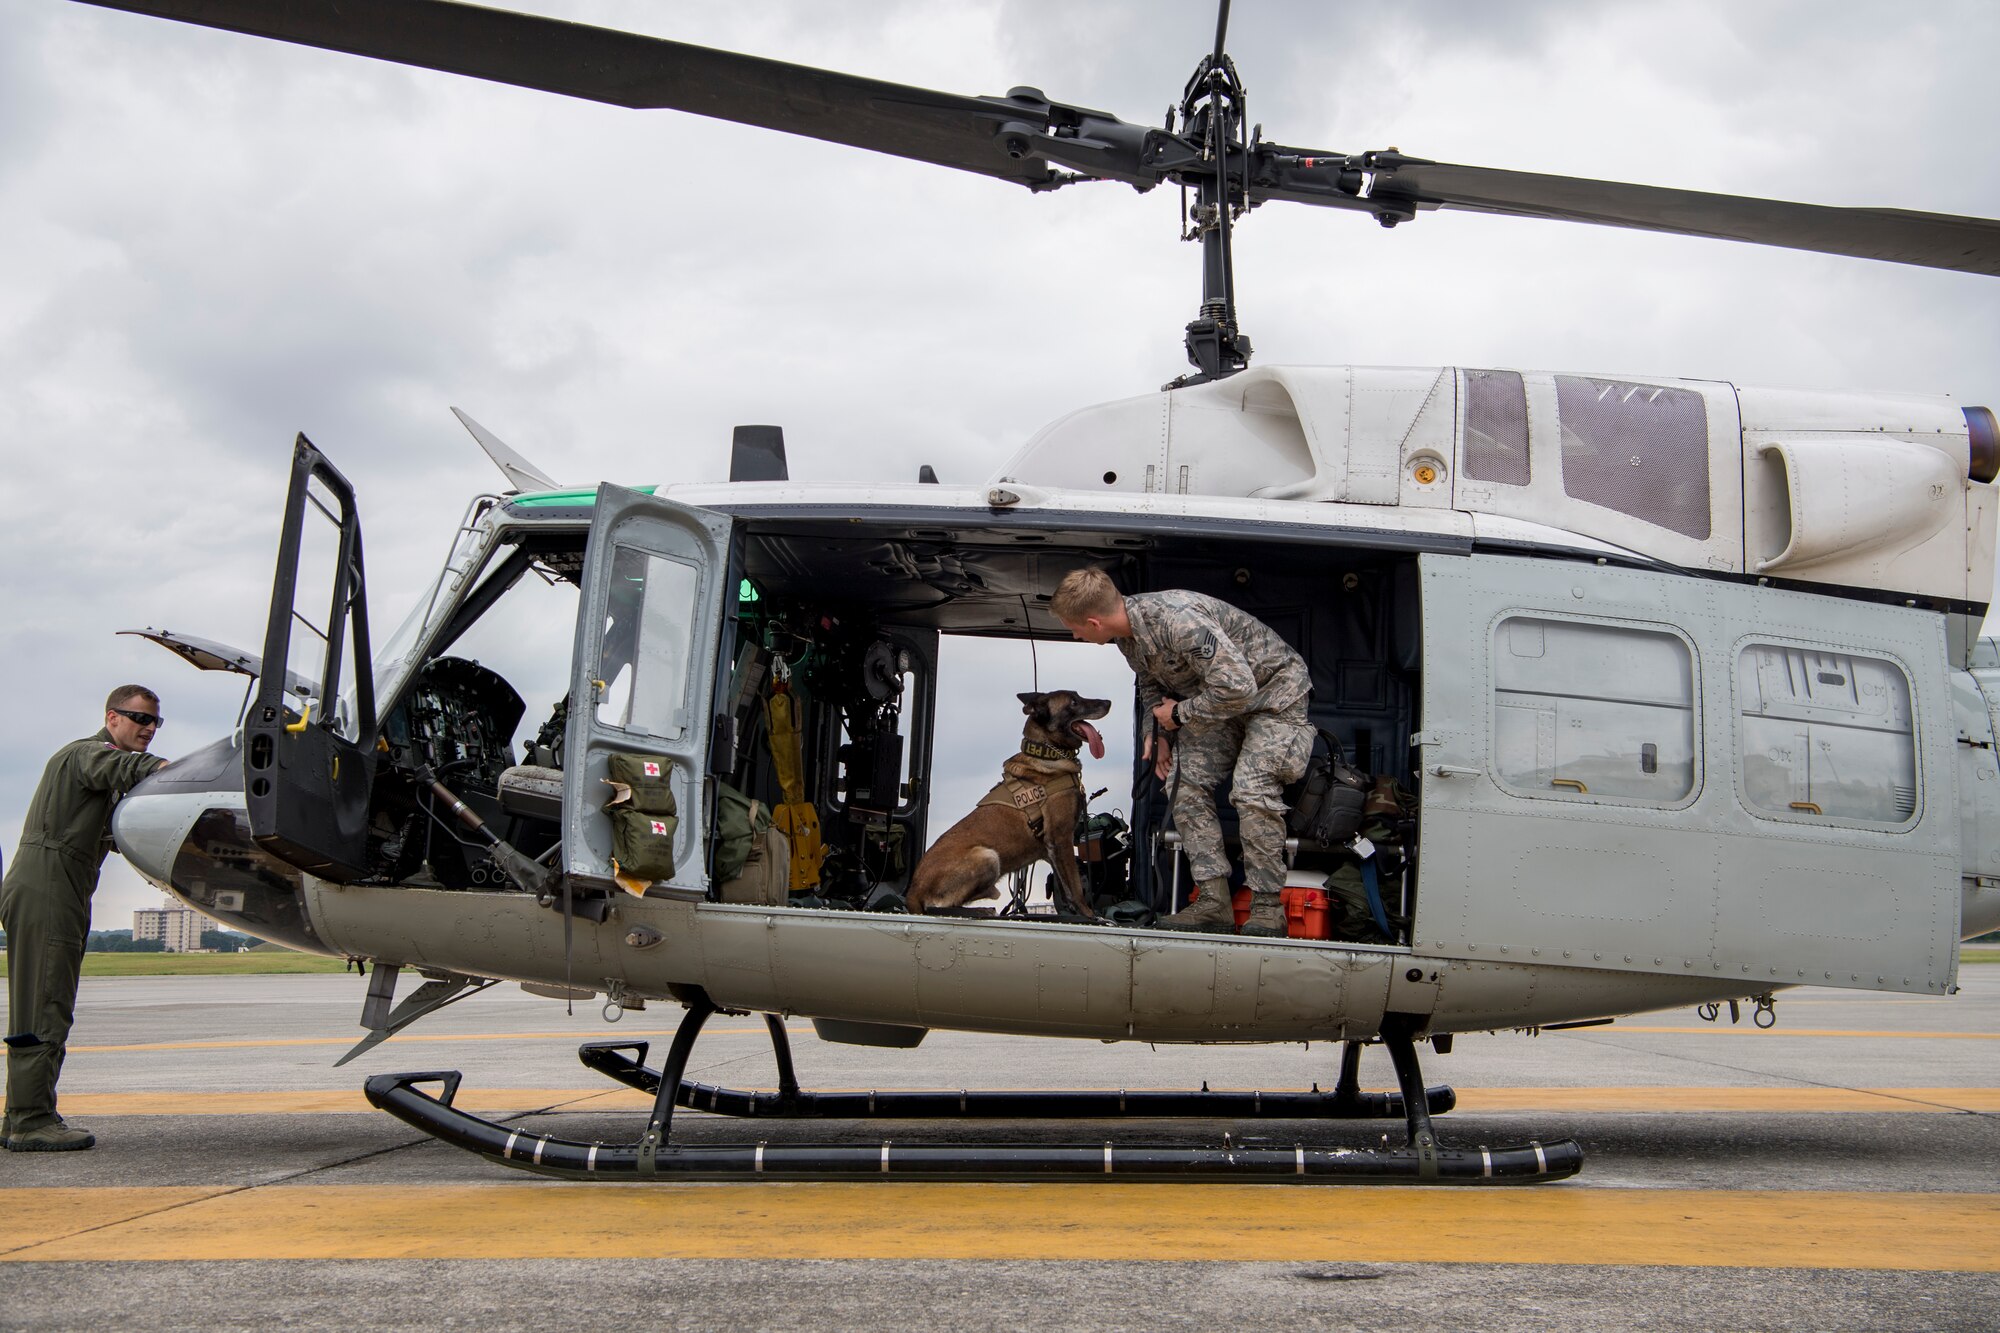 Staff Sgt. Cody Nickell, 374th Security Forces Squadron military working dog handler, works with Topa, 374 SFS MWD, to get him accustomed to being inside a UH-1N helicopter during a 459th Airlift Squadron MWD familiarization flight July 26, 2018, at Yokota Air Base, Japan.